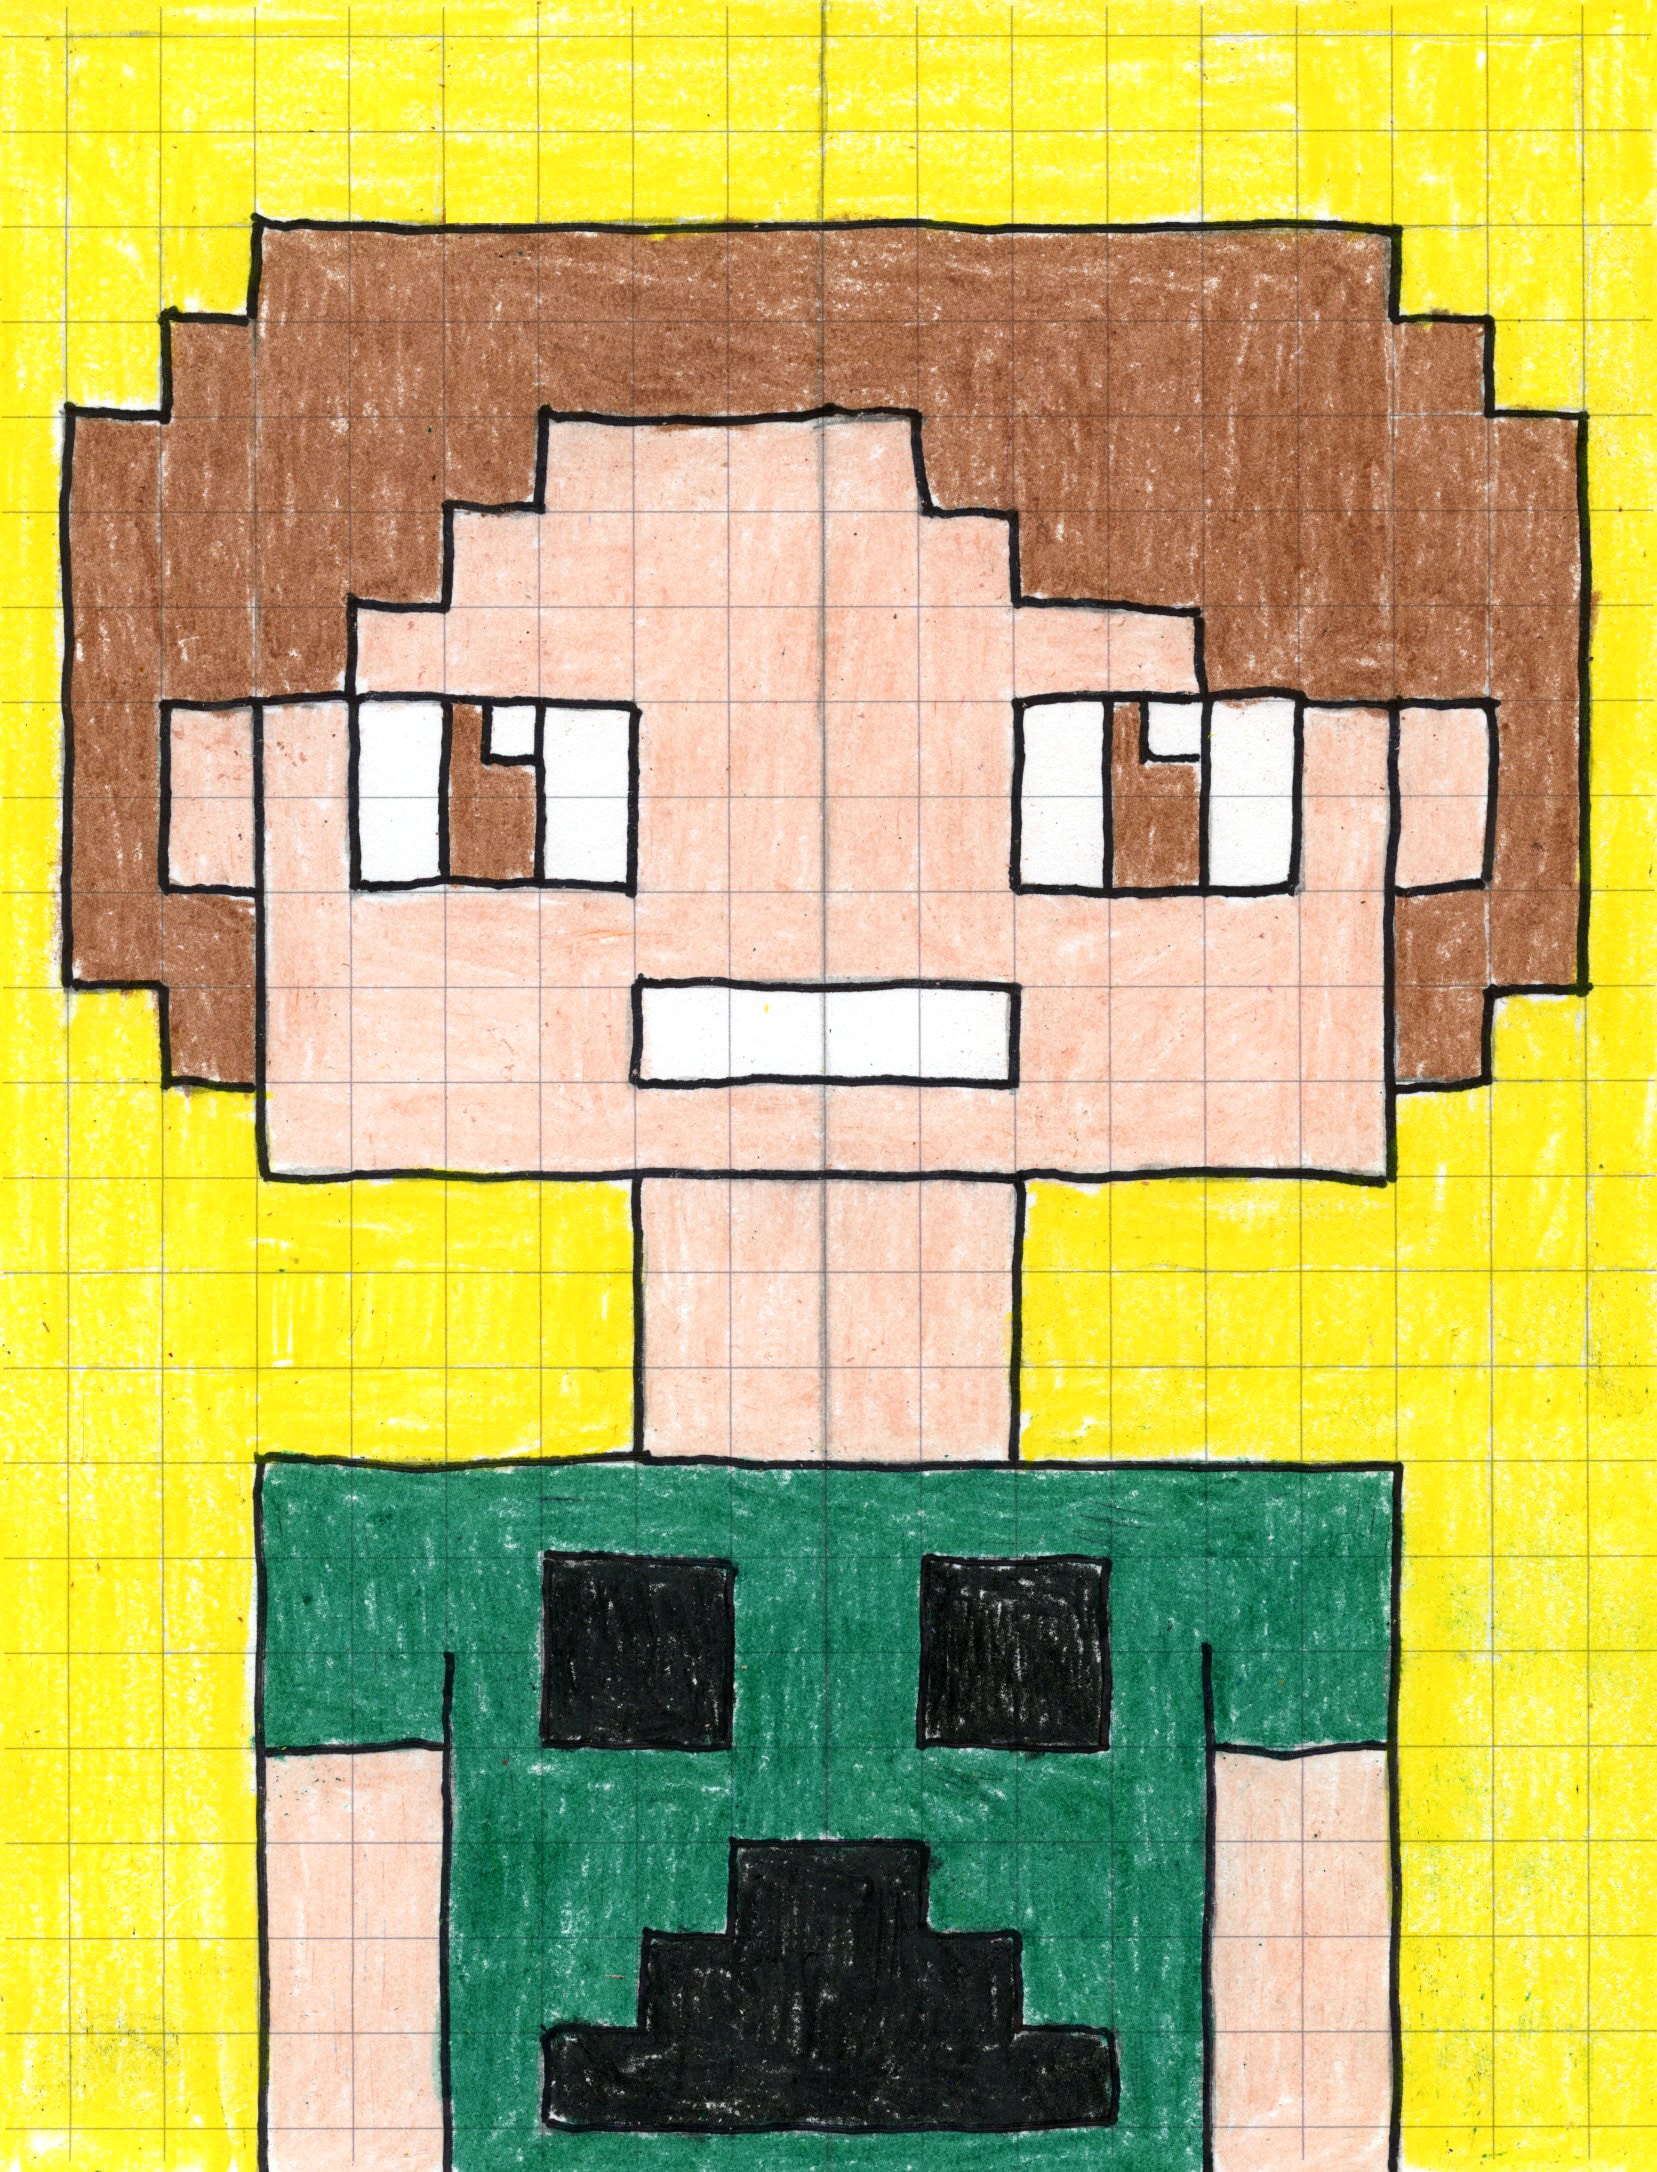 Easy How to Draw a Minecraft Selfie Tutorial and Coloring Page